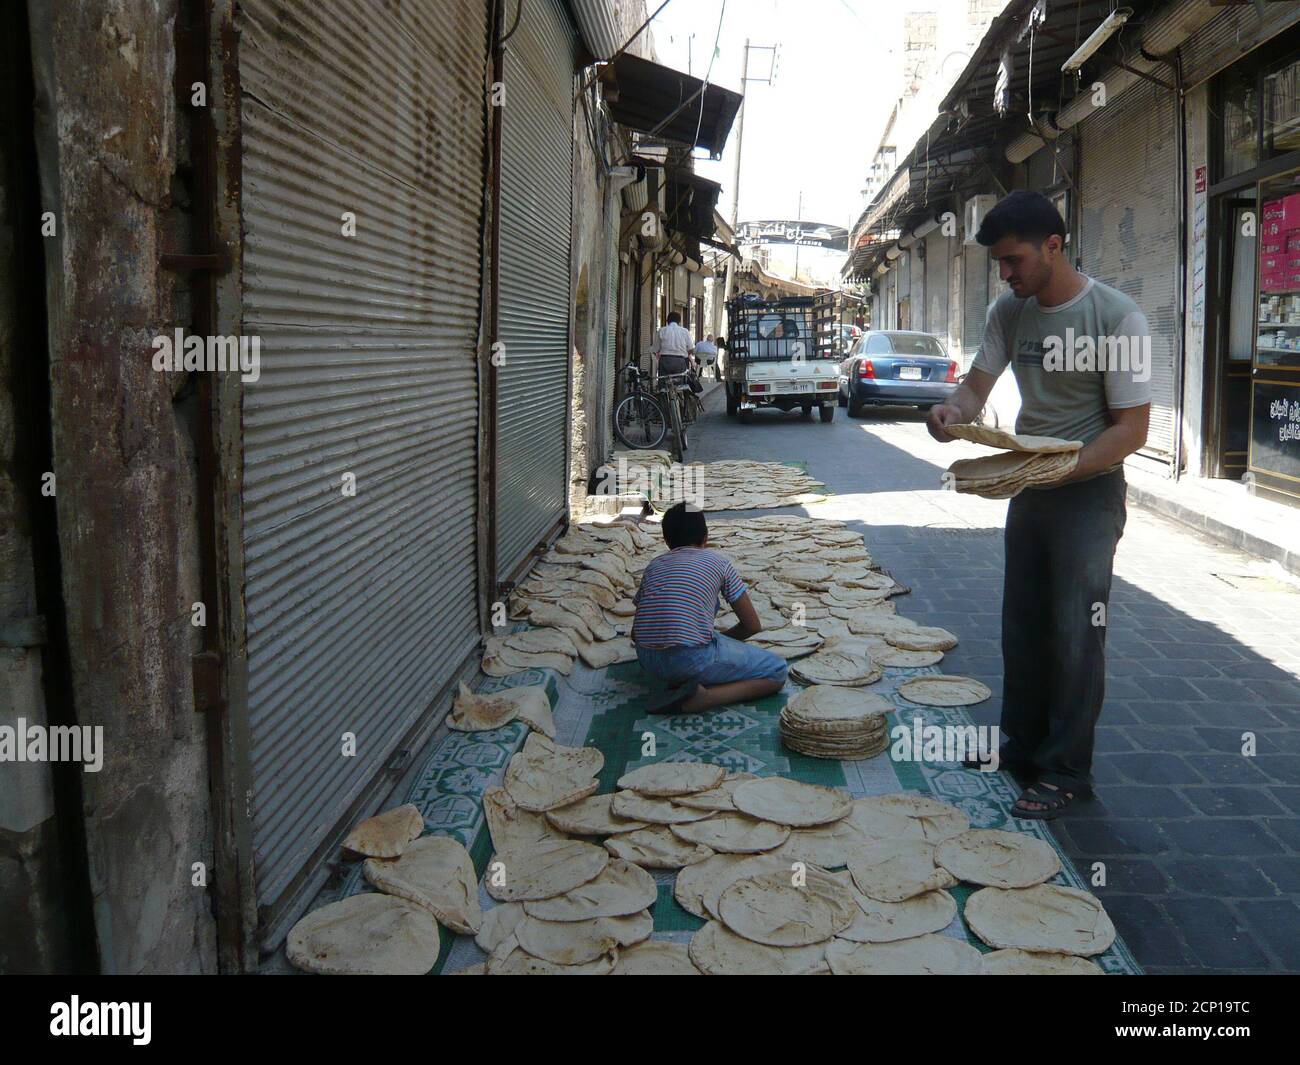 A baker displays traditional bread during the first day of Ramadan in the Old city of Aleppo, Syria, August 11, 2010.  REUTERS/Sandra Auger Stock Photo